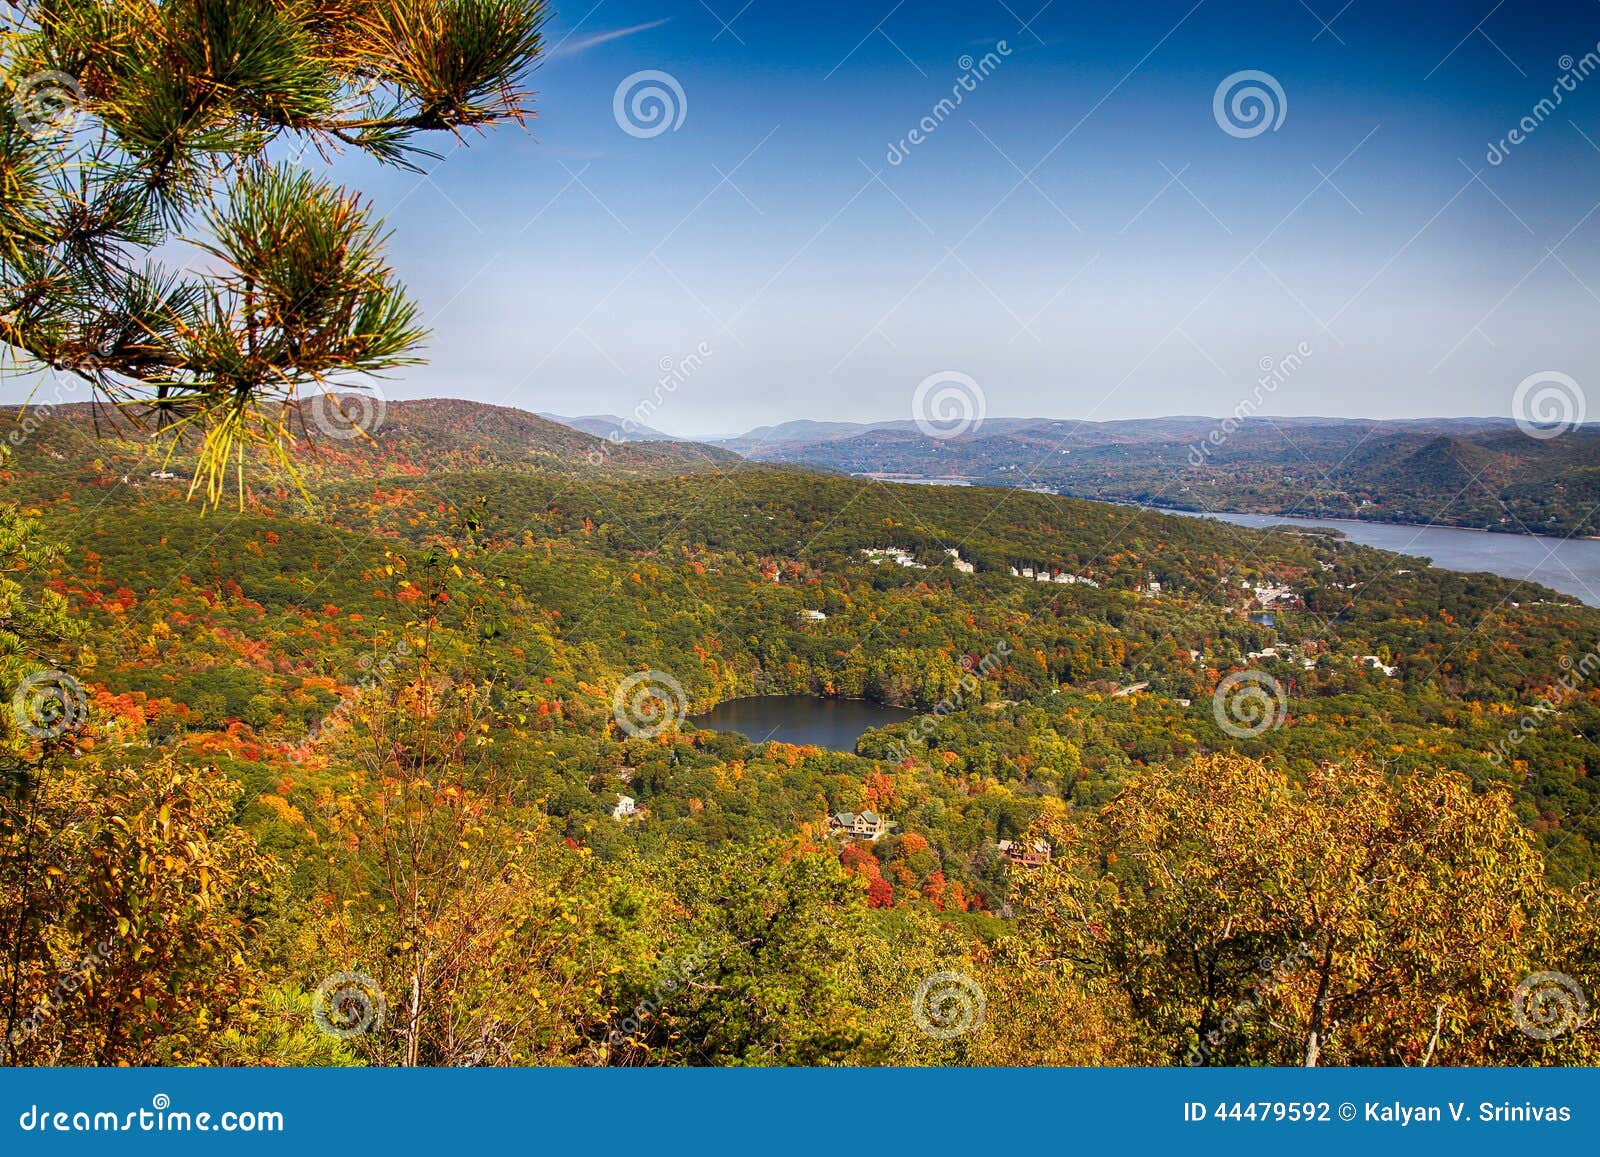 25,086 Upstate Images, Stock Photos, 3D objects, & Vectors